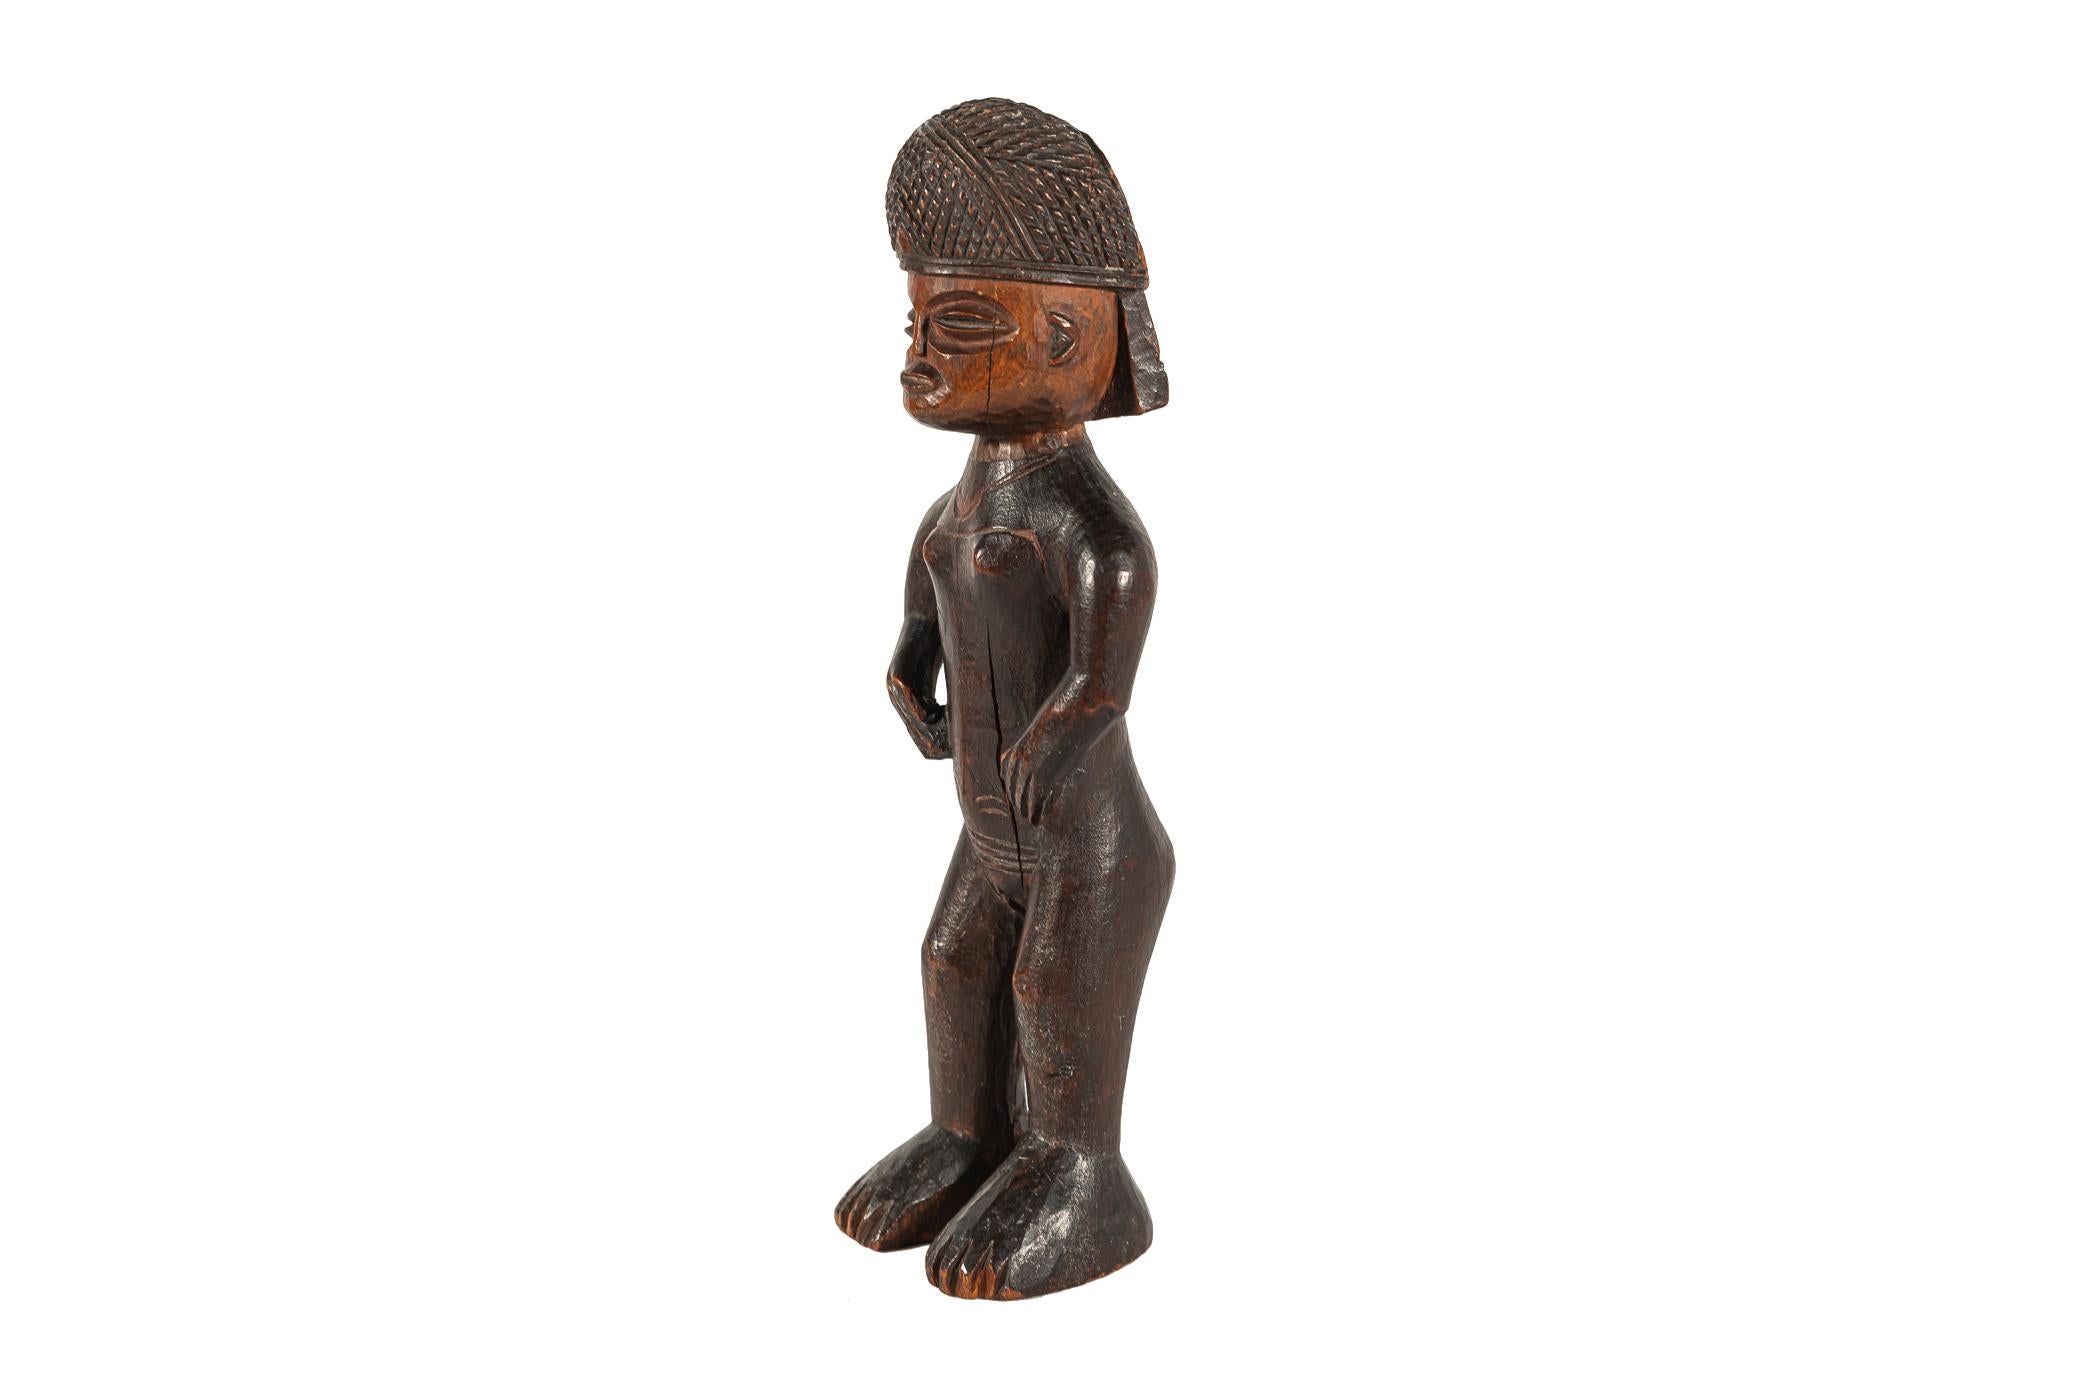 Lwena statue, Tchokwe, 
Wood,
Democratic Republic of the Congo, circa 1950

Measures: Height 21 cm, depth 6 cm, width 8 cm.

Of Lunda origin, the Lwena emigrated from Angola to Zaire in the 19th century, repelled by the Chokwe. When some became